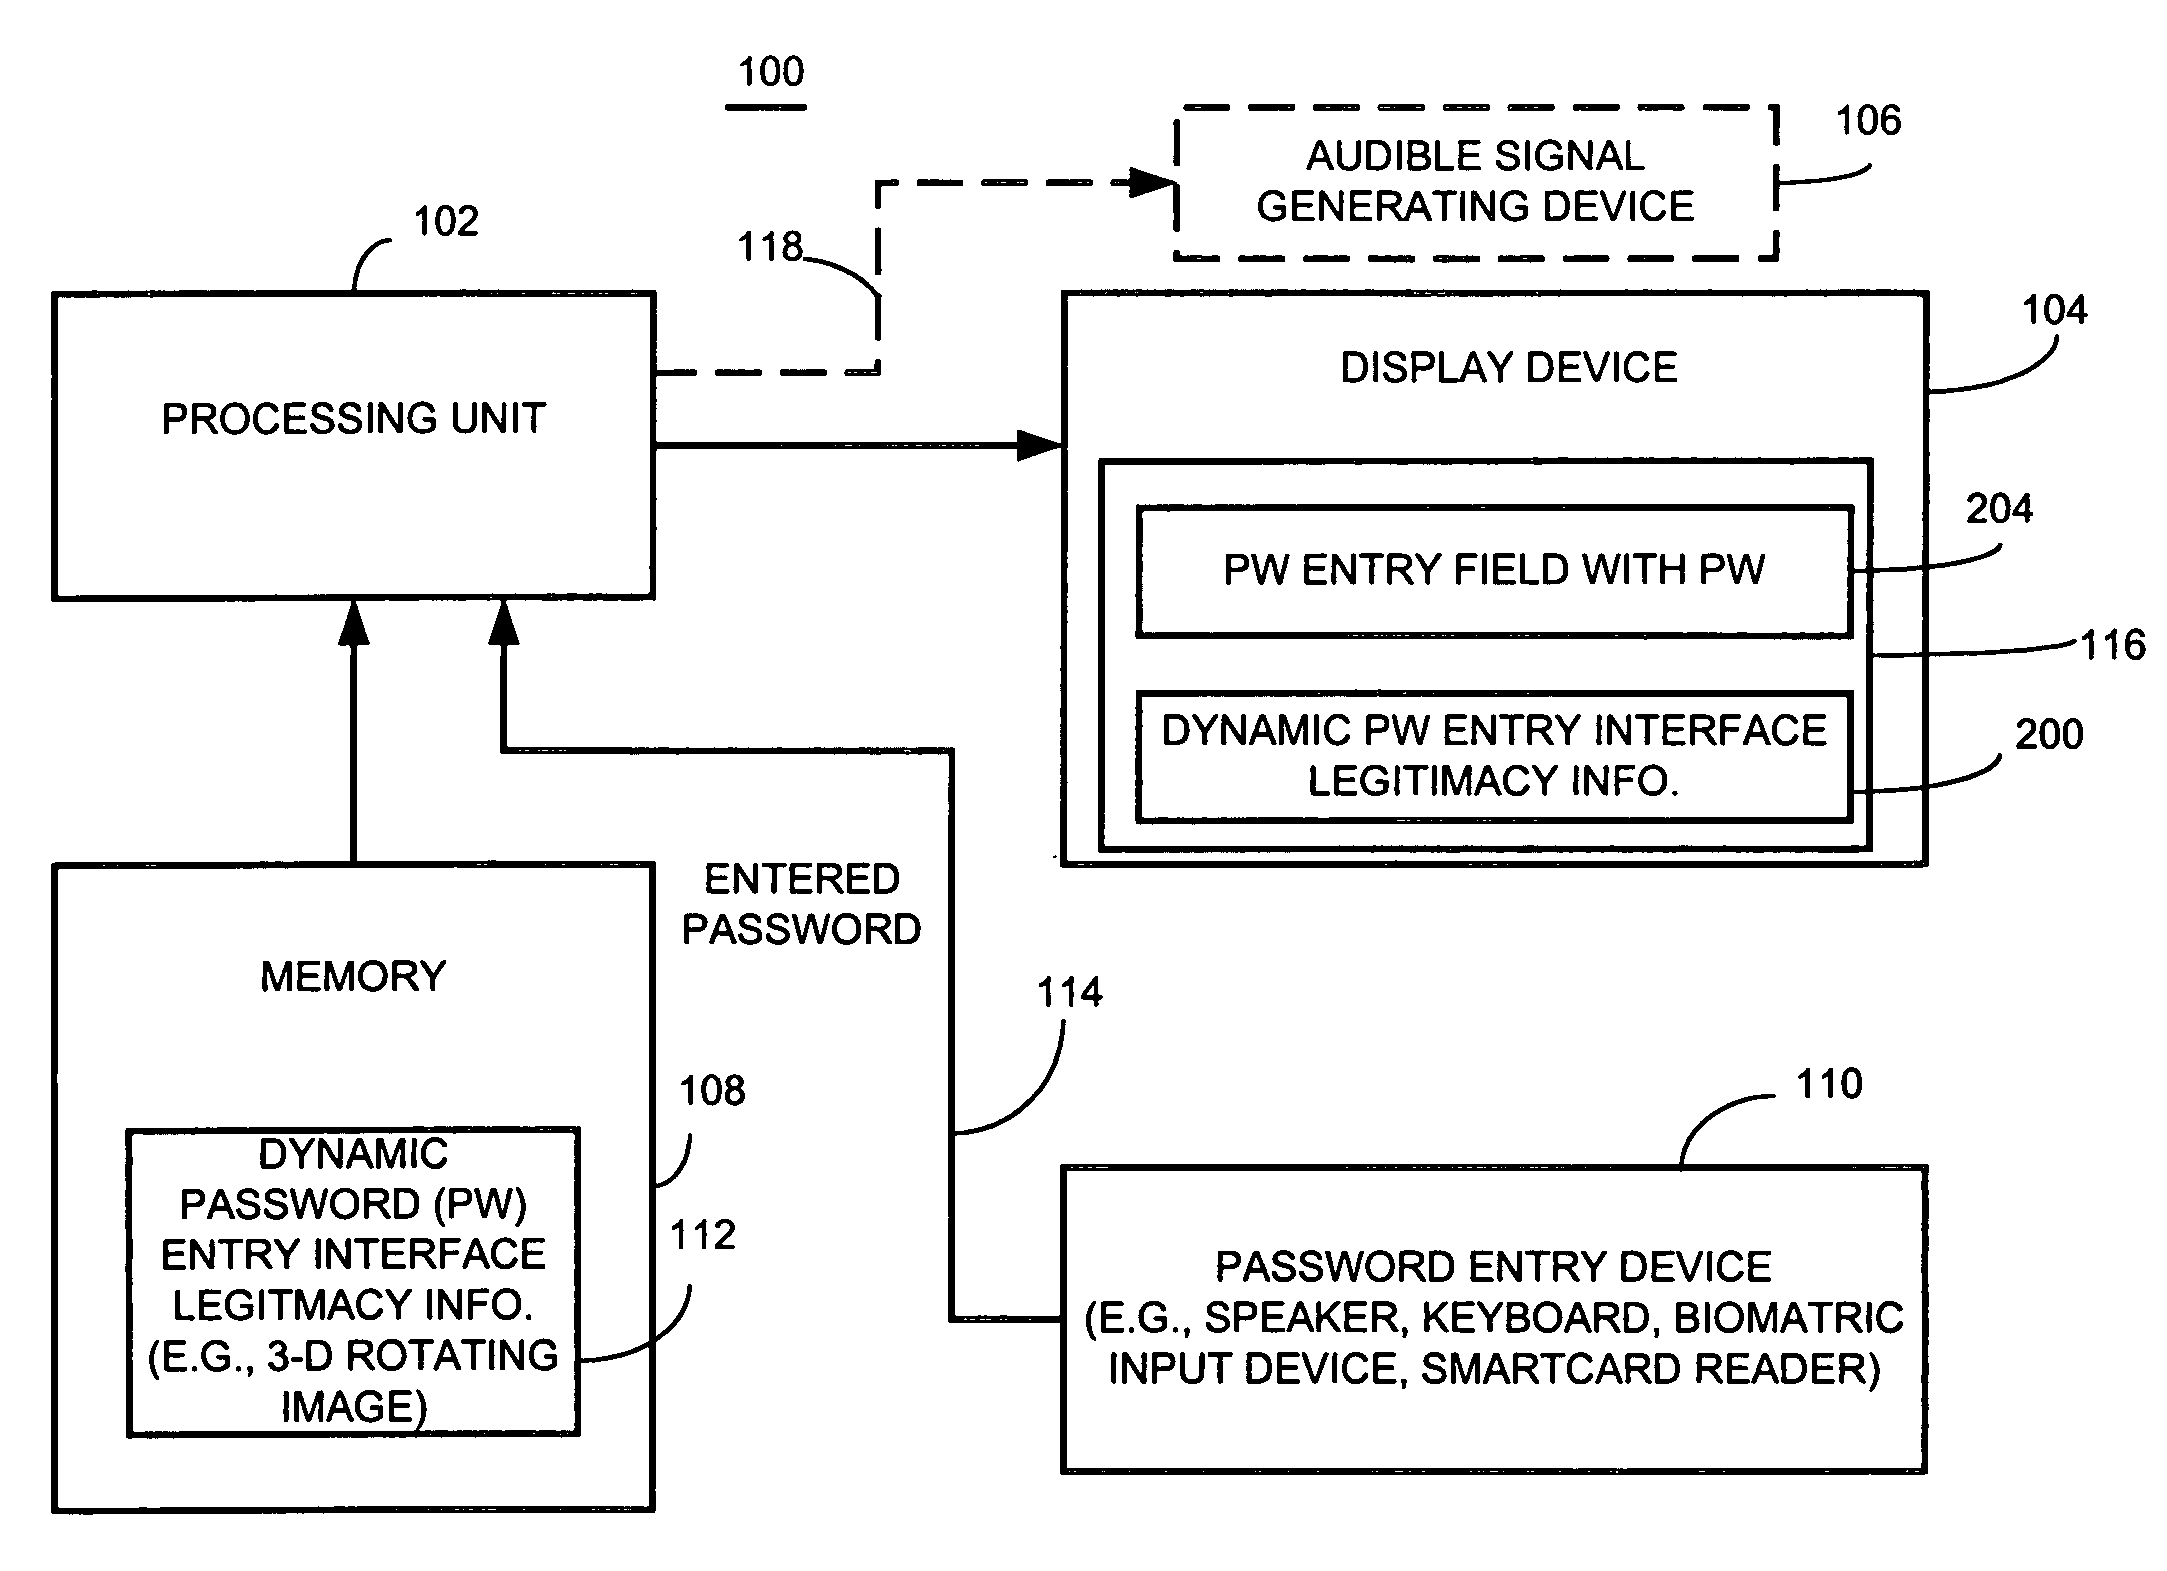 Method and apparatus for password entry using dynamic interface legitimacy information